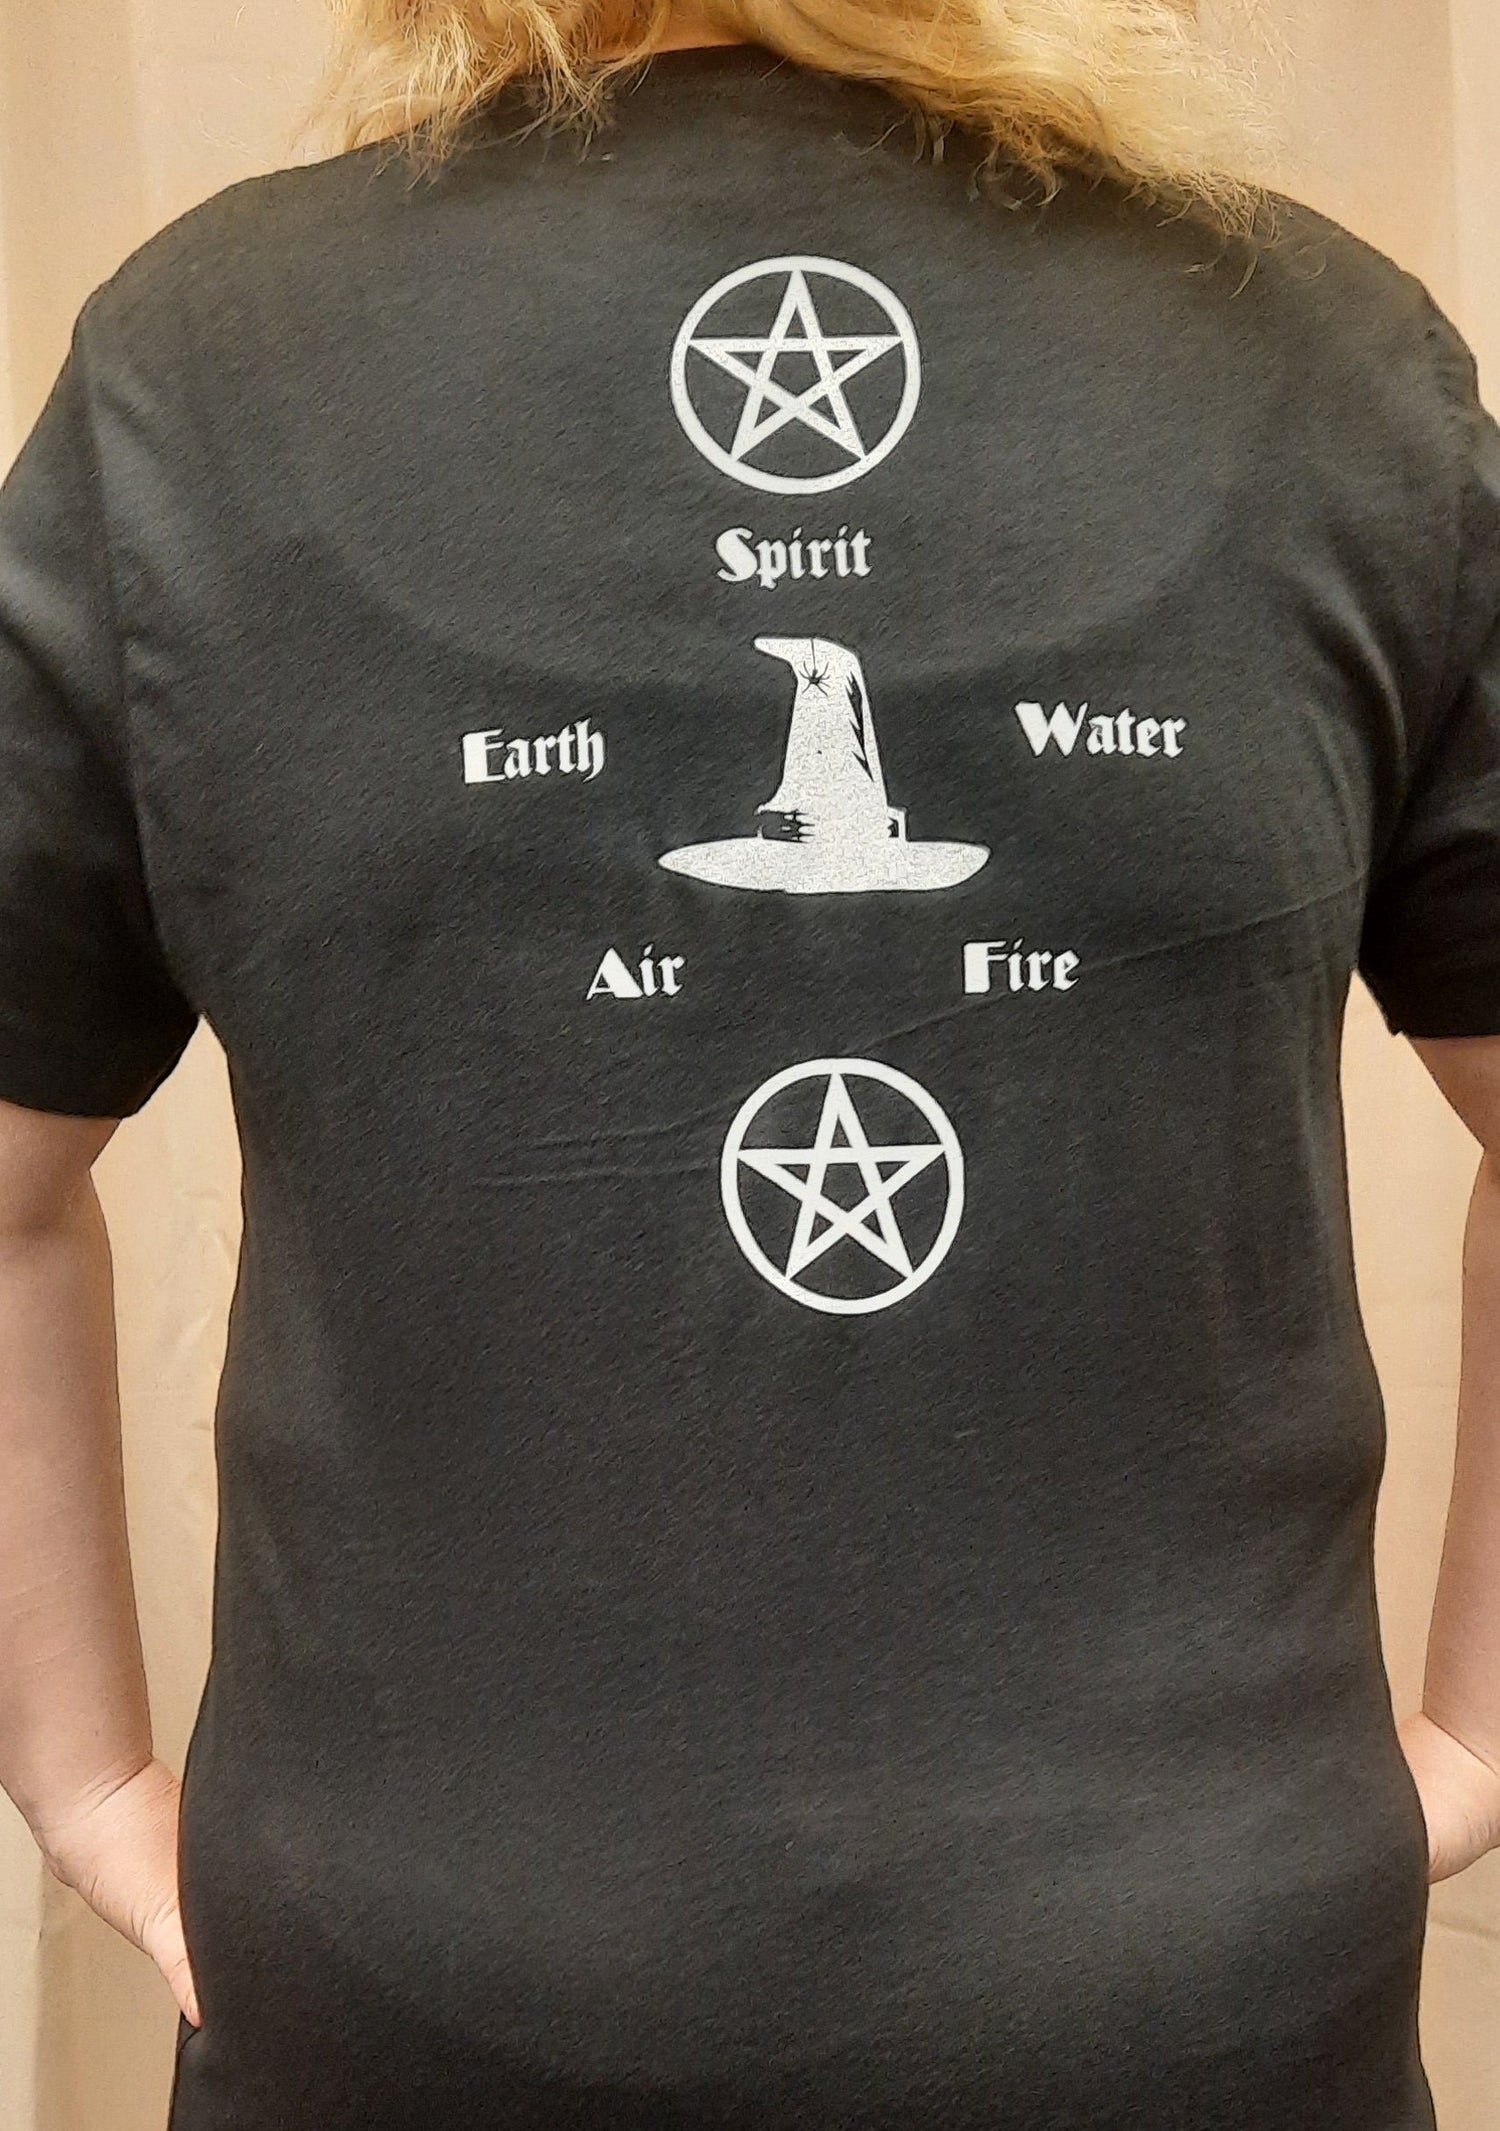 Bella Canvas short sleeve T-Shirt, size large. "Wiccan" design on front, Spirit, Earth, Air, Fire, Water design on back..